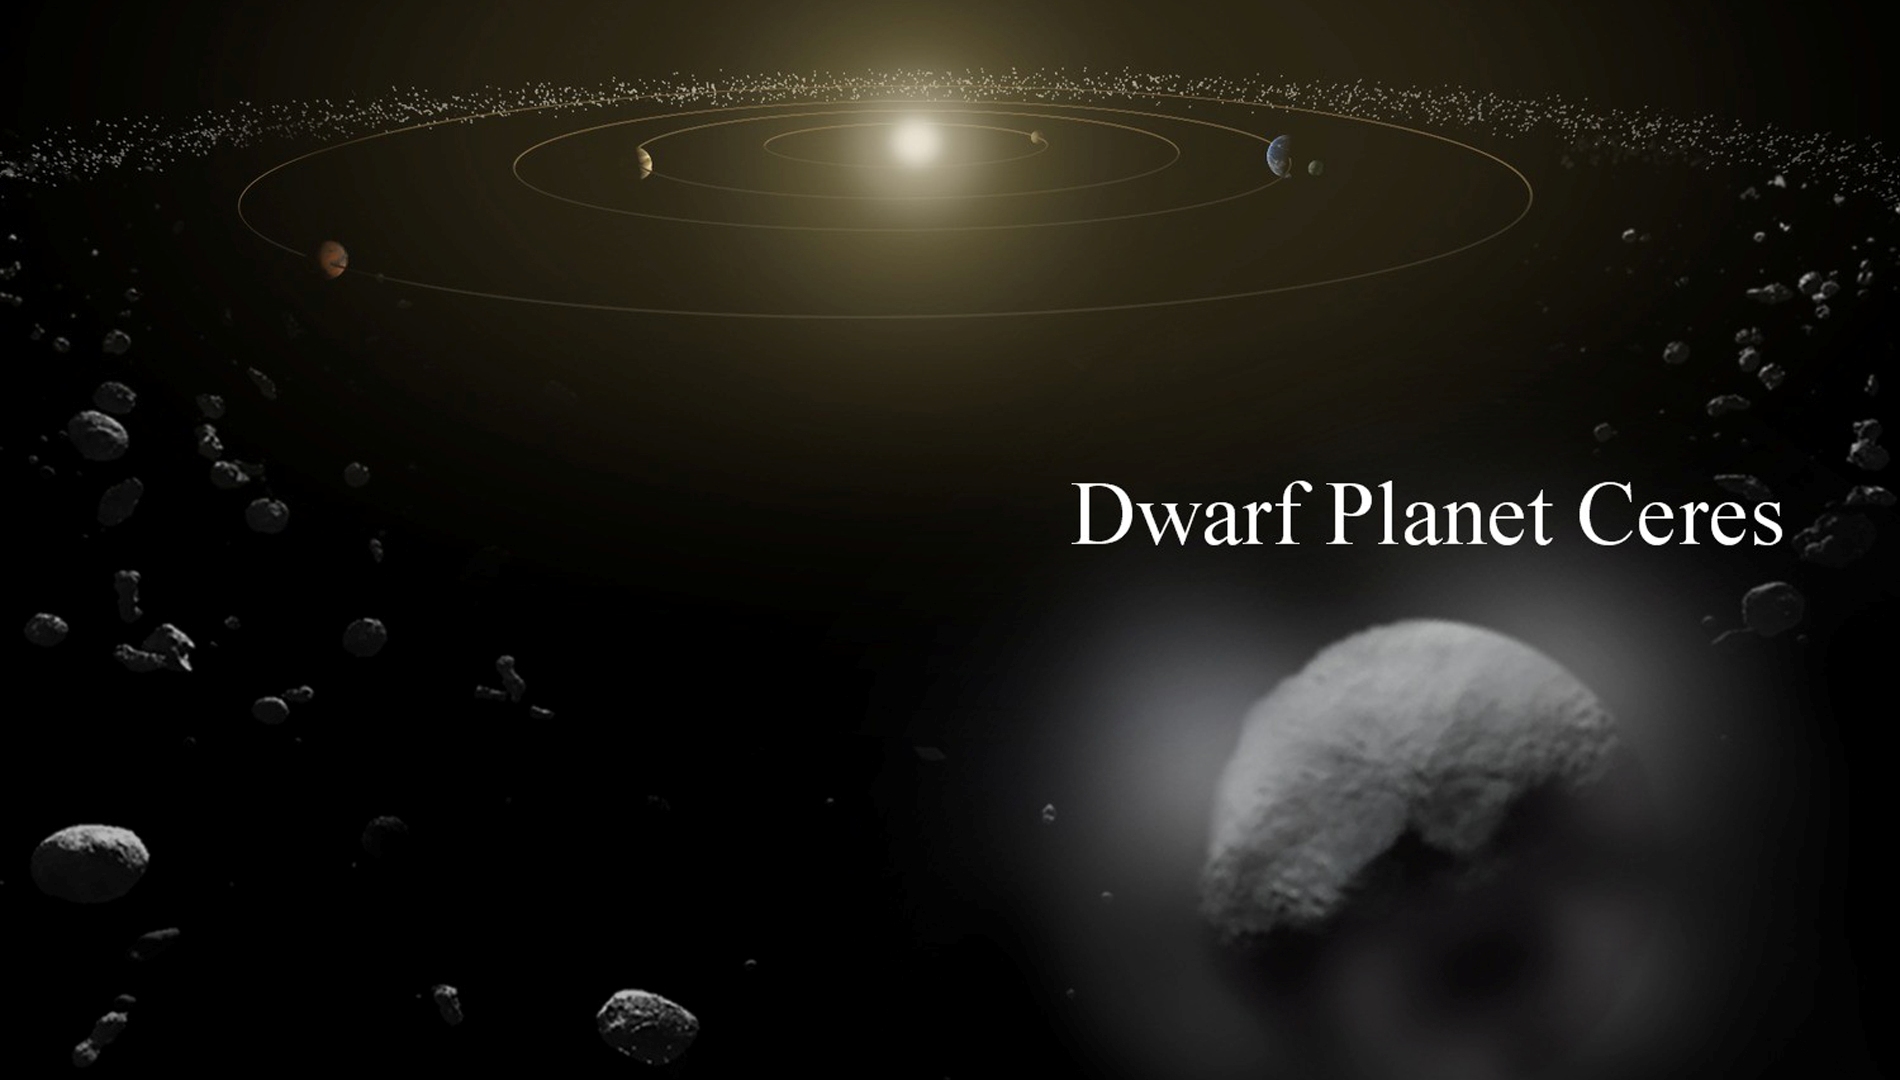 5 of 11. Dwarf planet Ceres is located in the main asteroid belt, between the orbits of Mars and Jupiter, as illustrated in this artist's conception. Observations by the Herschel space observatory between 2011 and 2013 find that the dwarf planet has a thin water vapor atmosphere. This is the first unambiguous detection of water vapor around an object in the asteroid belt. (Credit: ESA/ATG medialab)